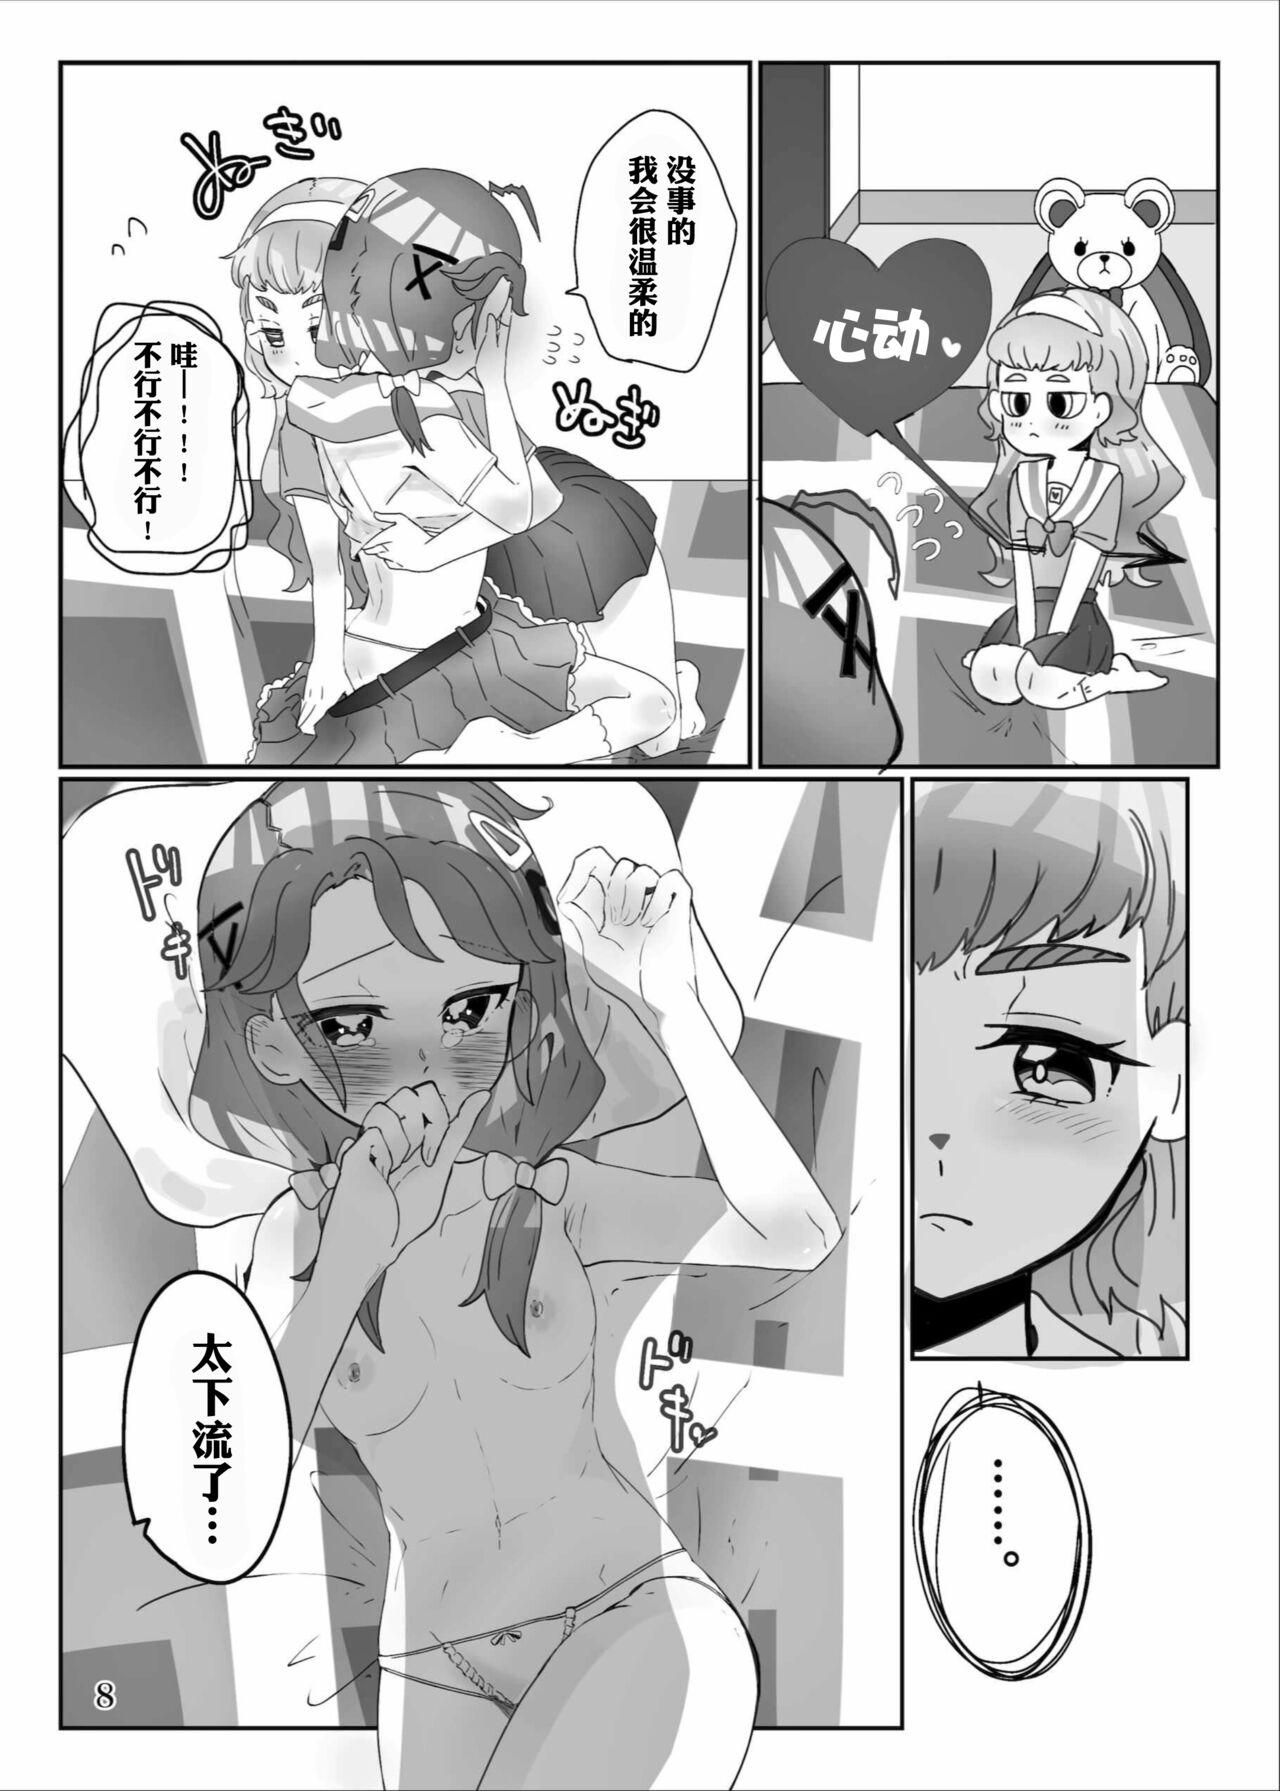 Van yaritaigotone do my best - Pretty cure Tropical rouge precure Cruising - Page 10